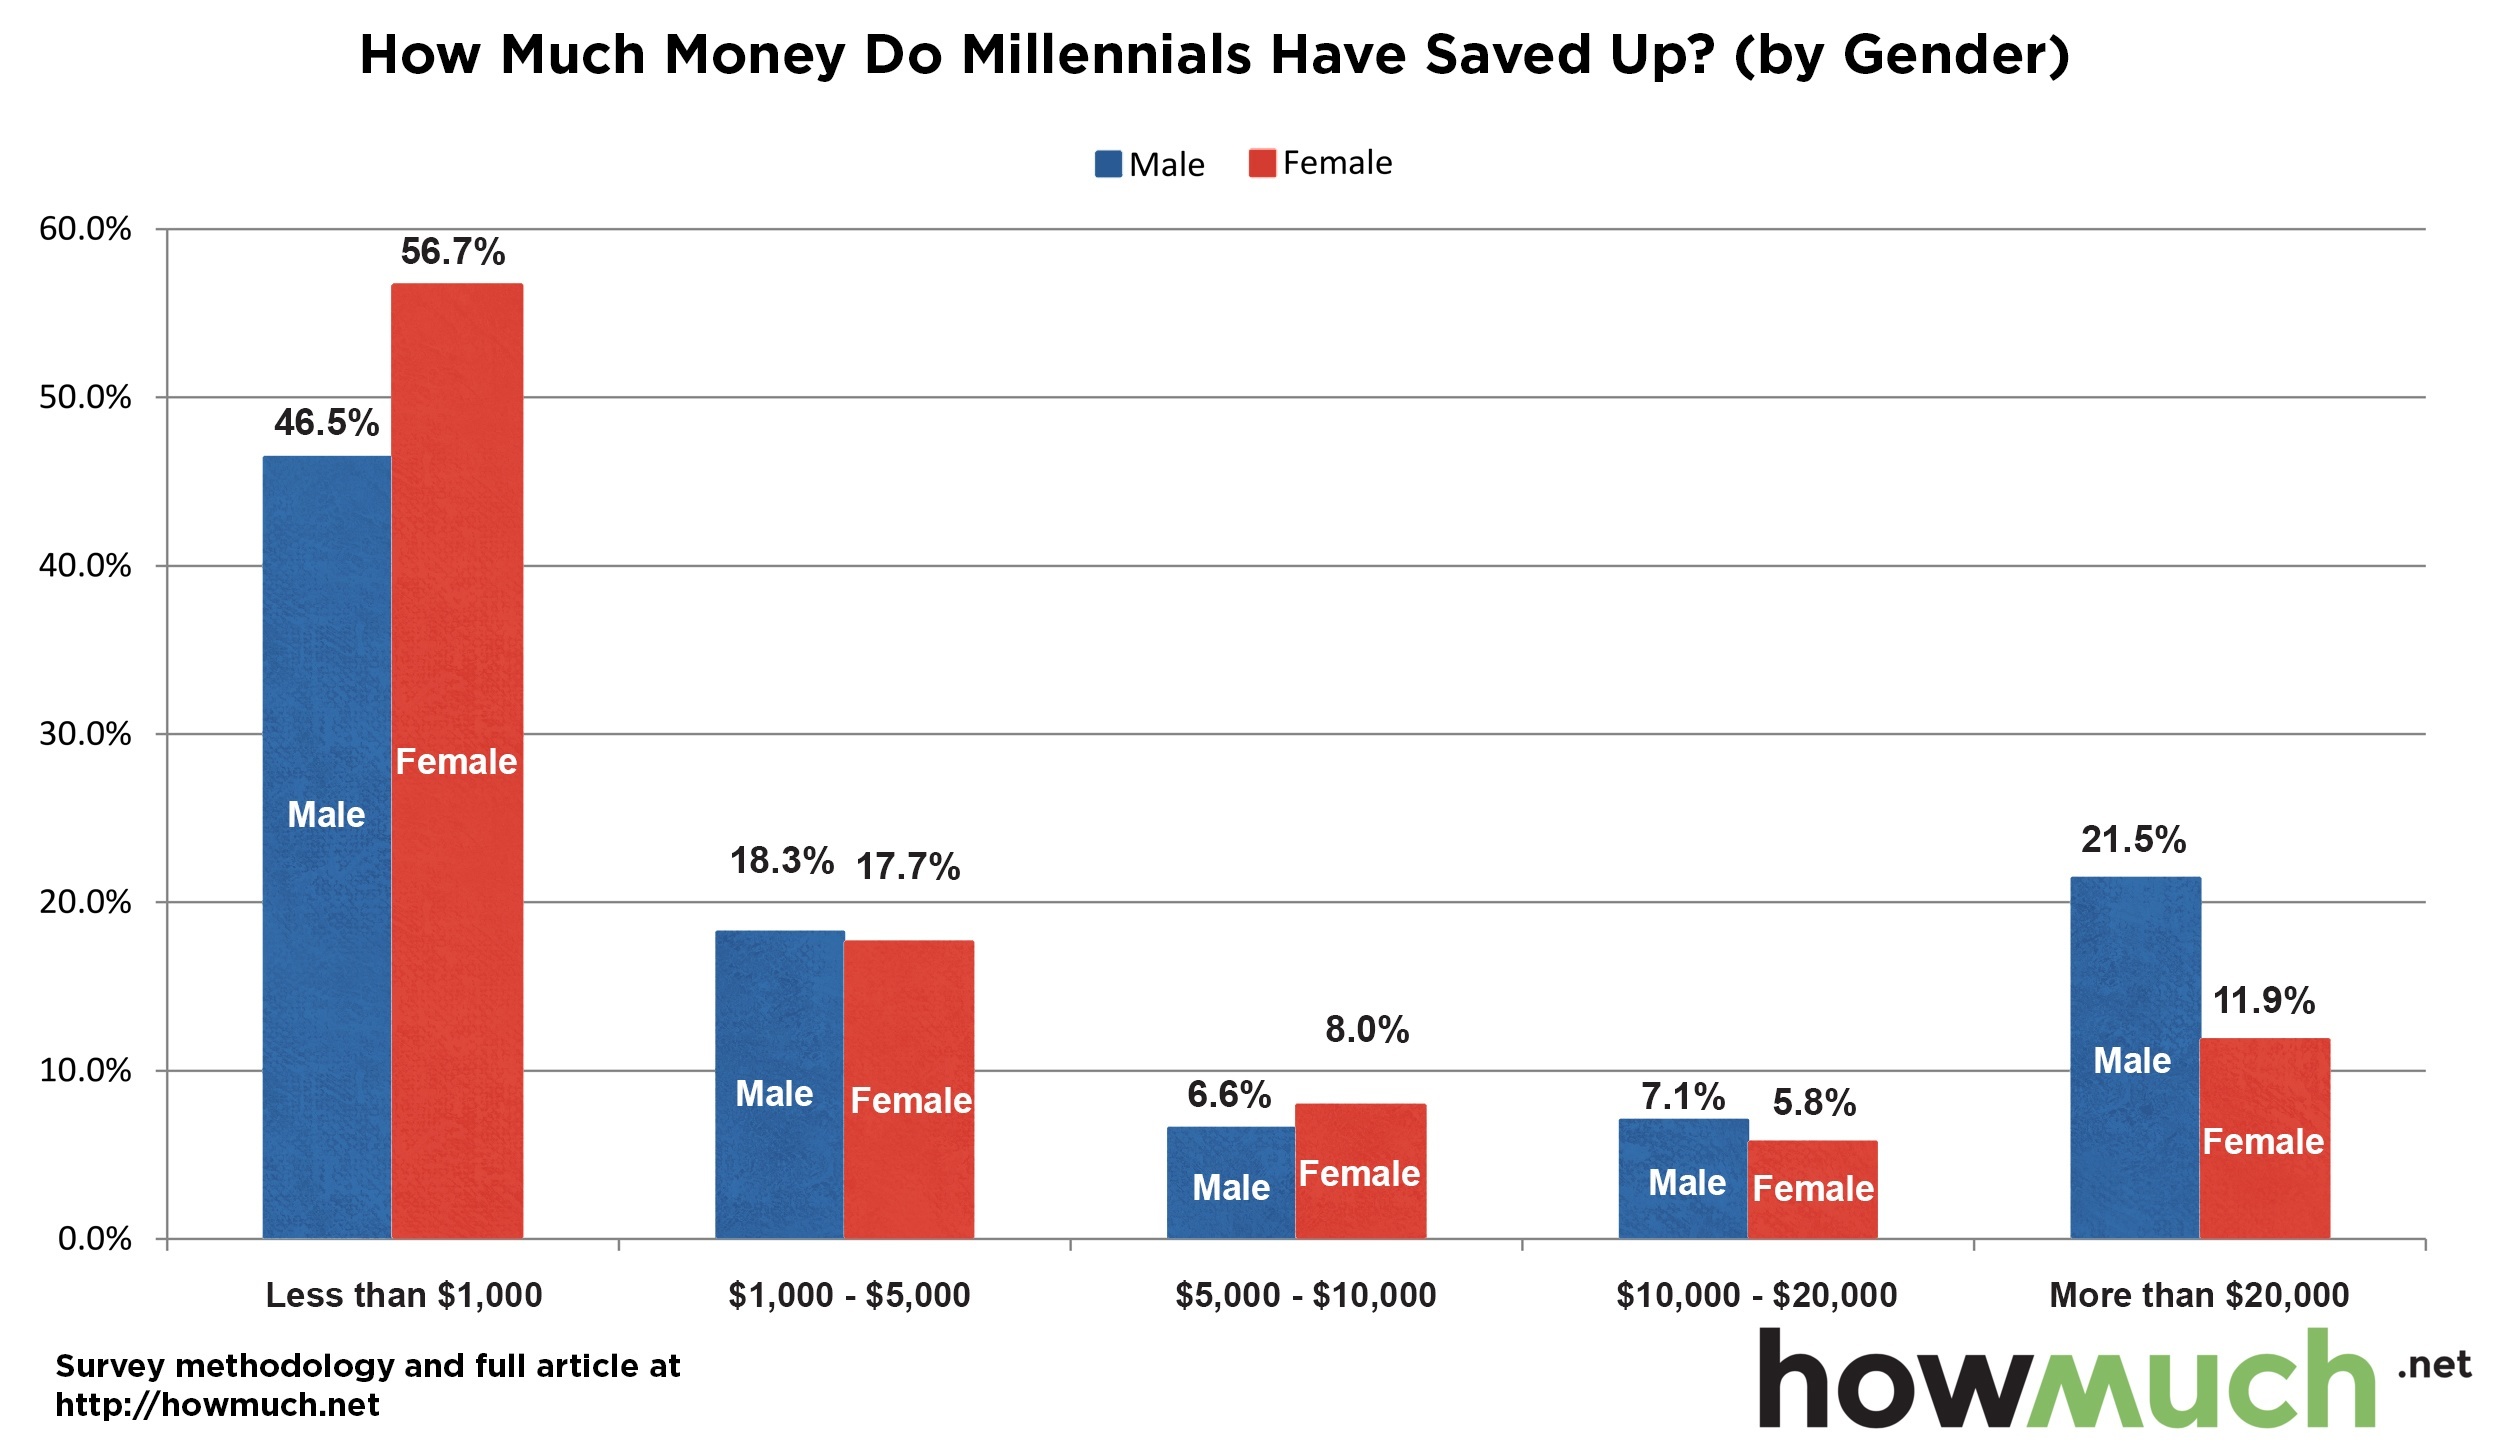 The Majority of Millennials Have $1,000 or Less in Savings